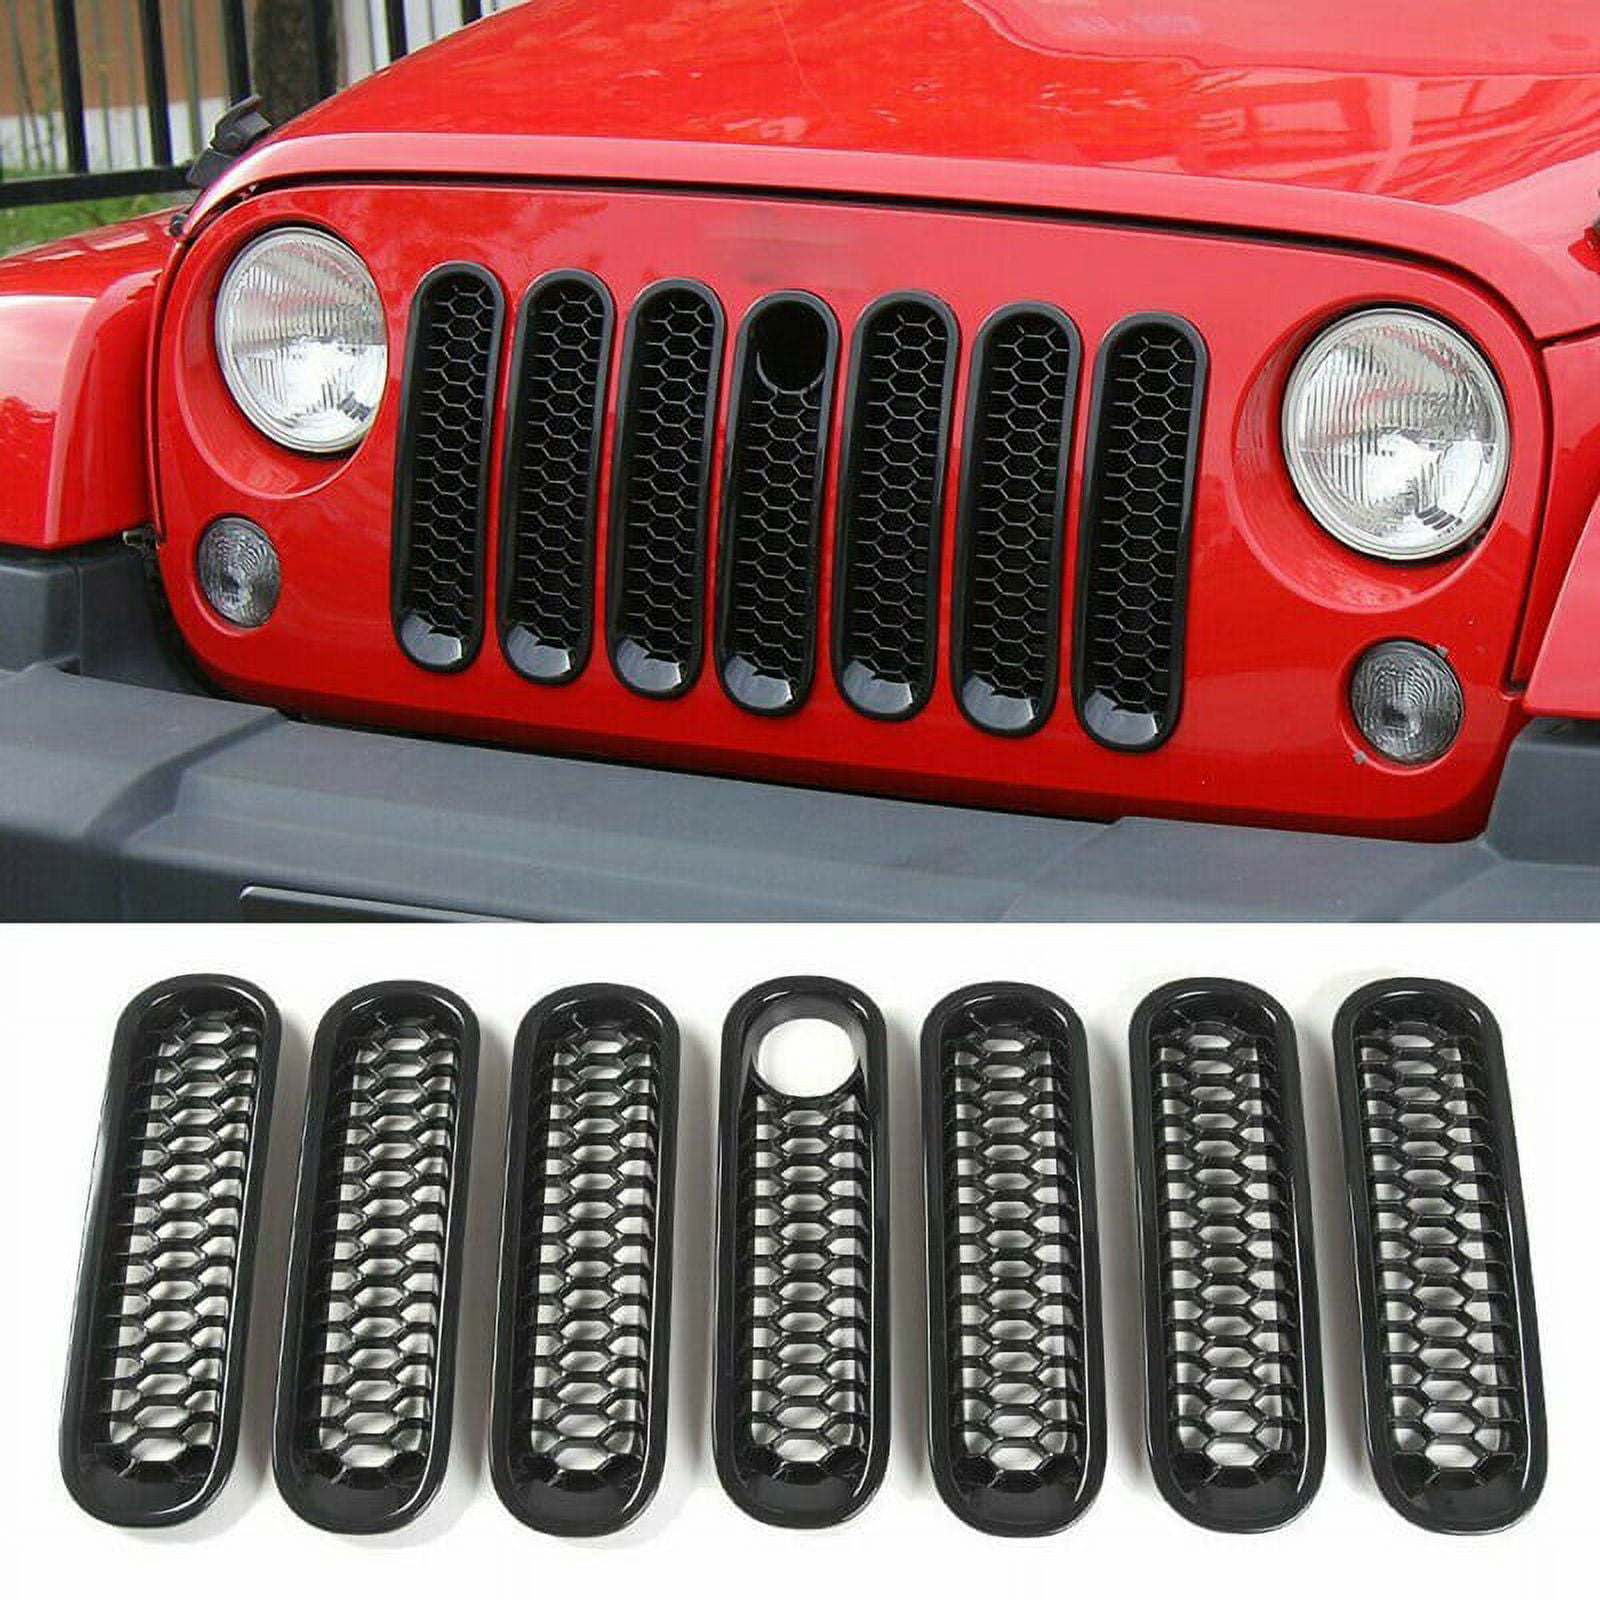 Front Grill Mesh Inserts Kit Honeycomb Clip-in Grille Guard Mesh Grille  with Lock Hole for Wrangler JK 2007-2017